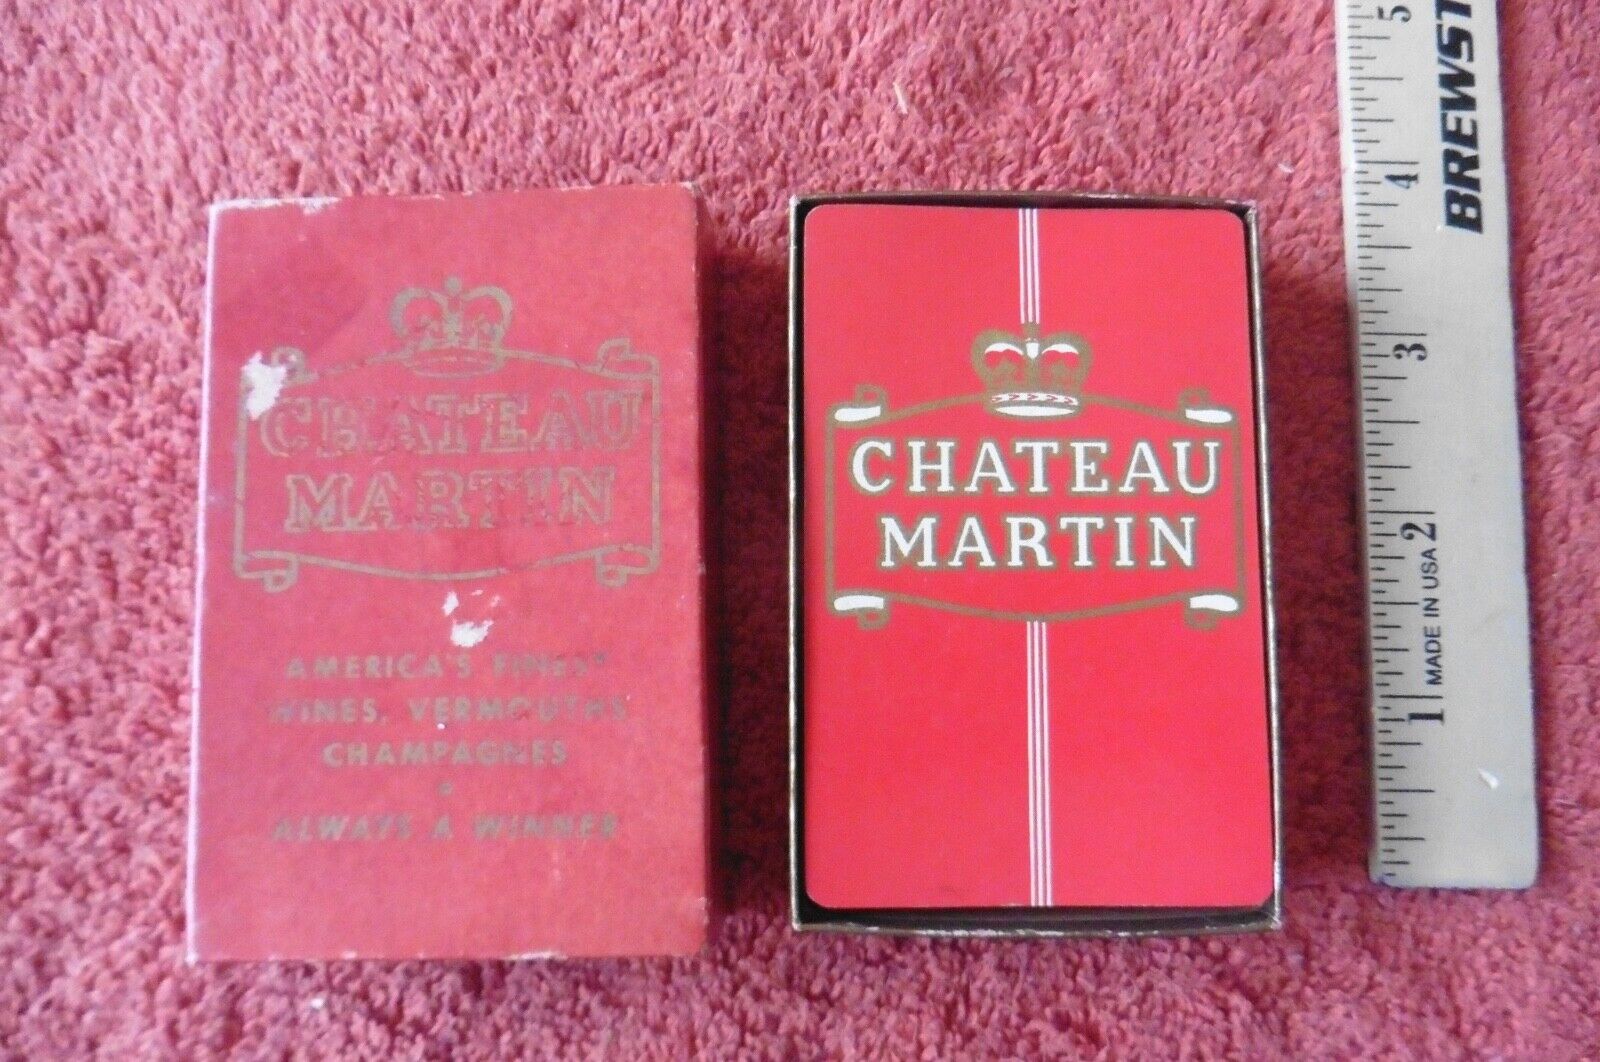 1 Vintage Chateau Martin Playing Cards Set Americas Wines Vermouths Champagnes